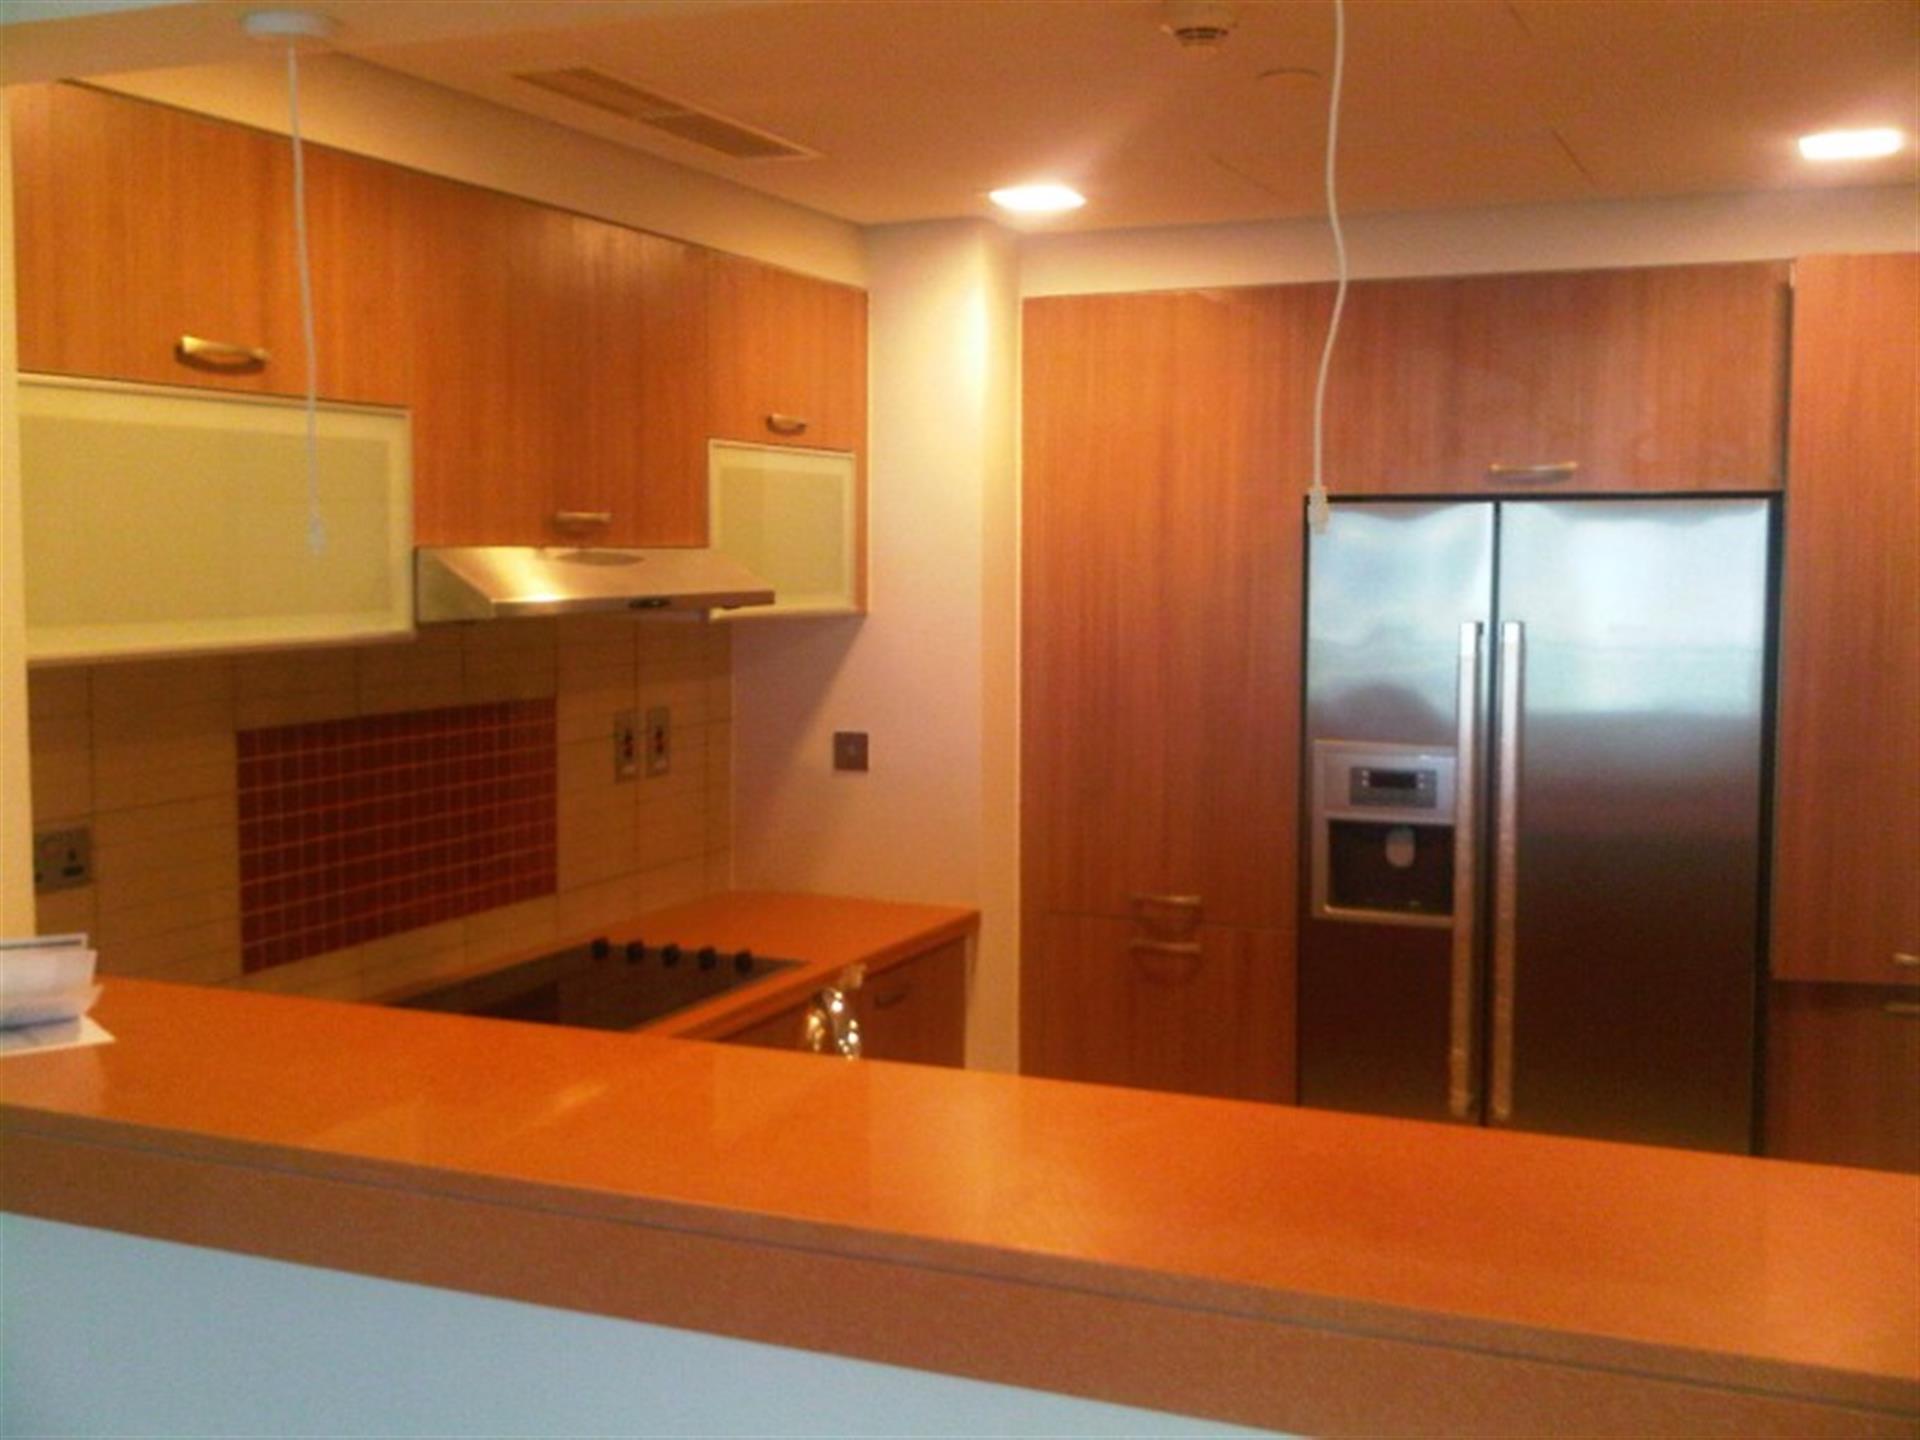 For Sale 2 Bedroom Type D, Marina Residence 3